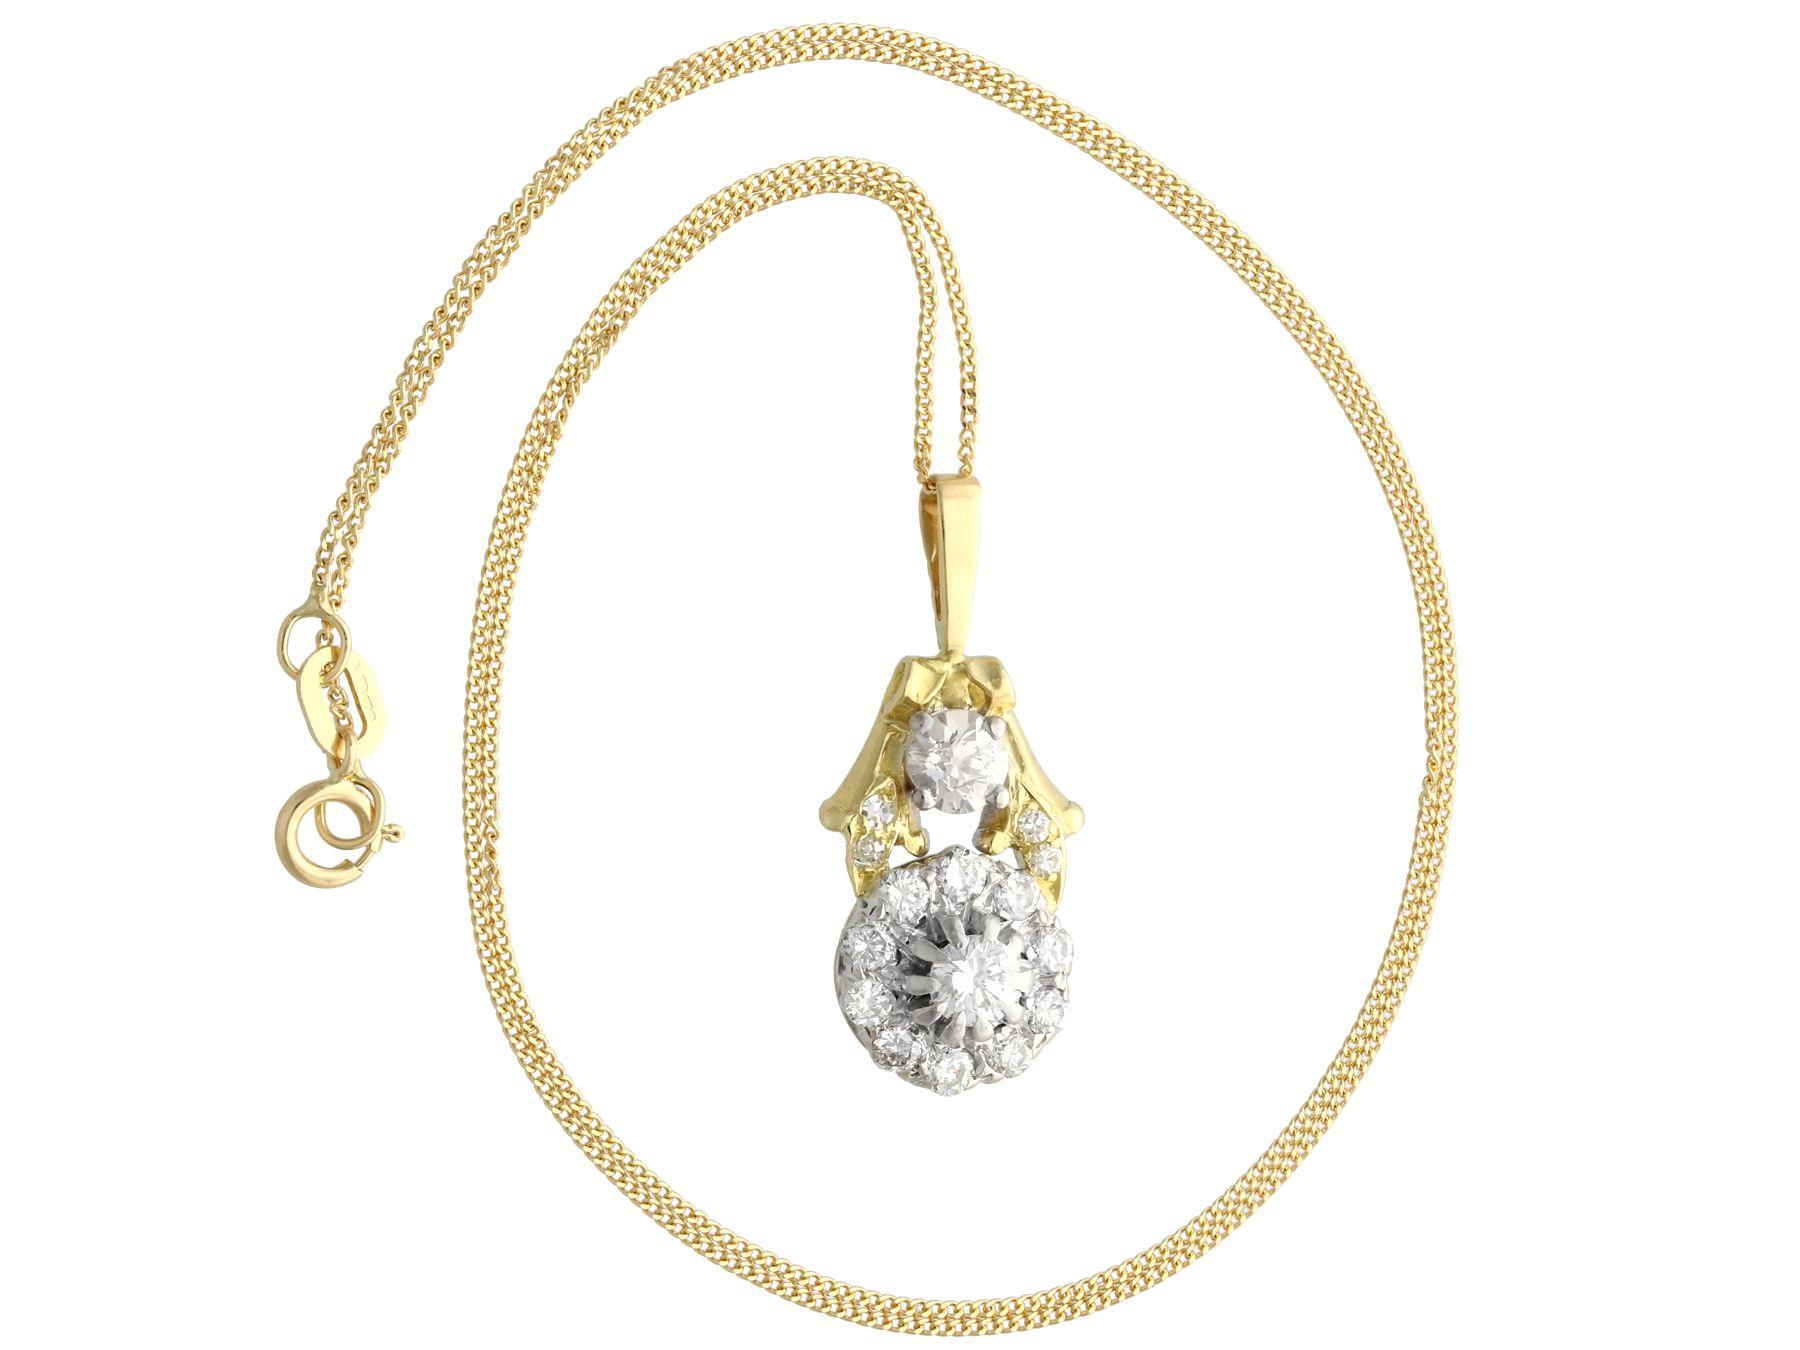 An impressive contemporary 18 karat yellow and white gold pendant set with antique and modern cut diamonds totalling 0.72 carats; part of our diverse diamond jewelry collections.

This fine and impressive diamond cluster pendant has been crafted in